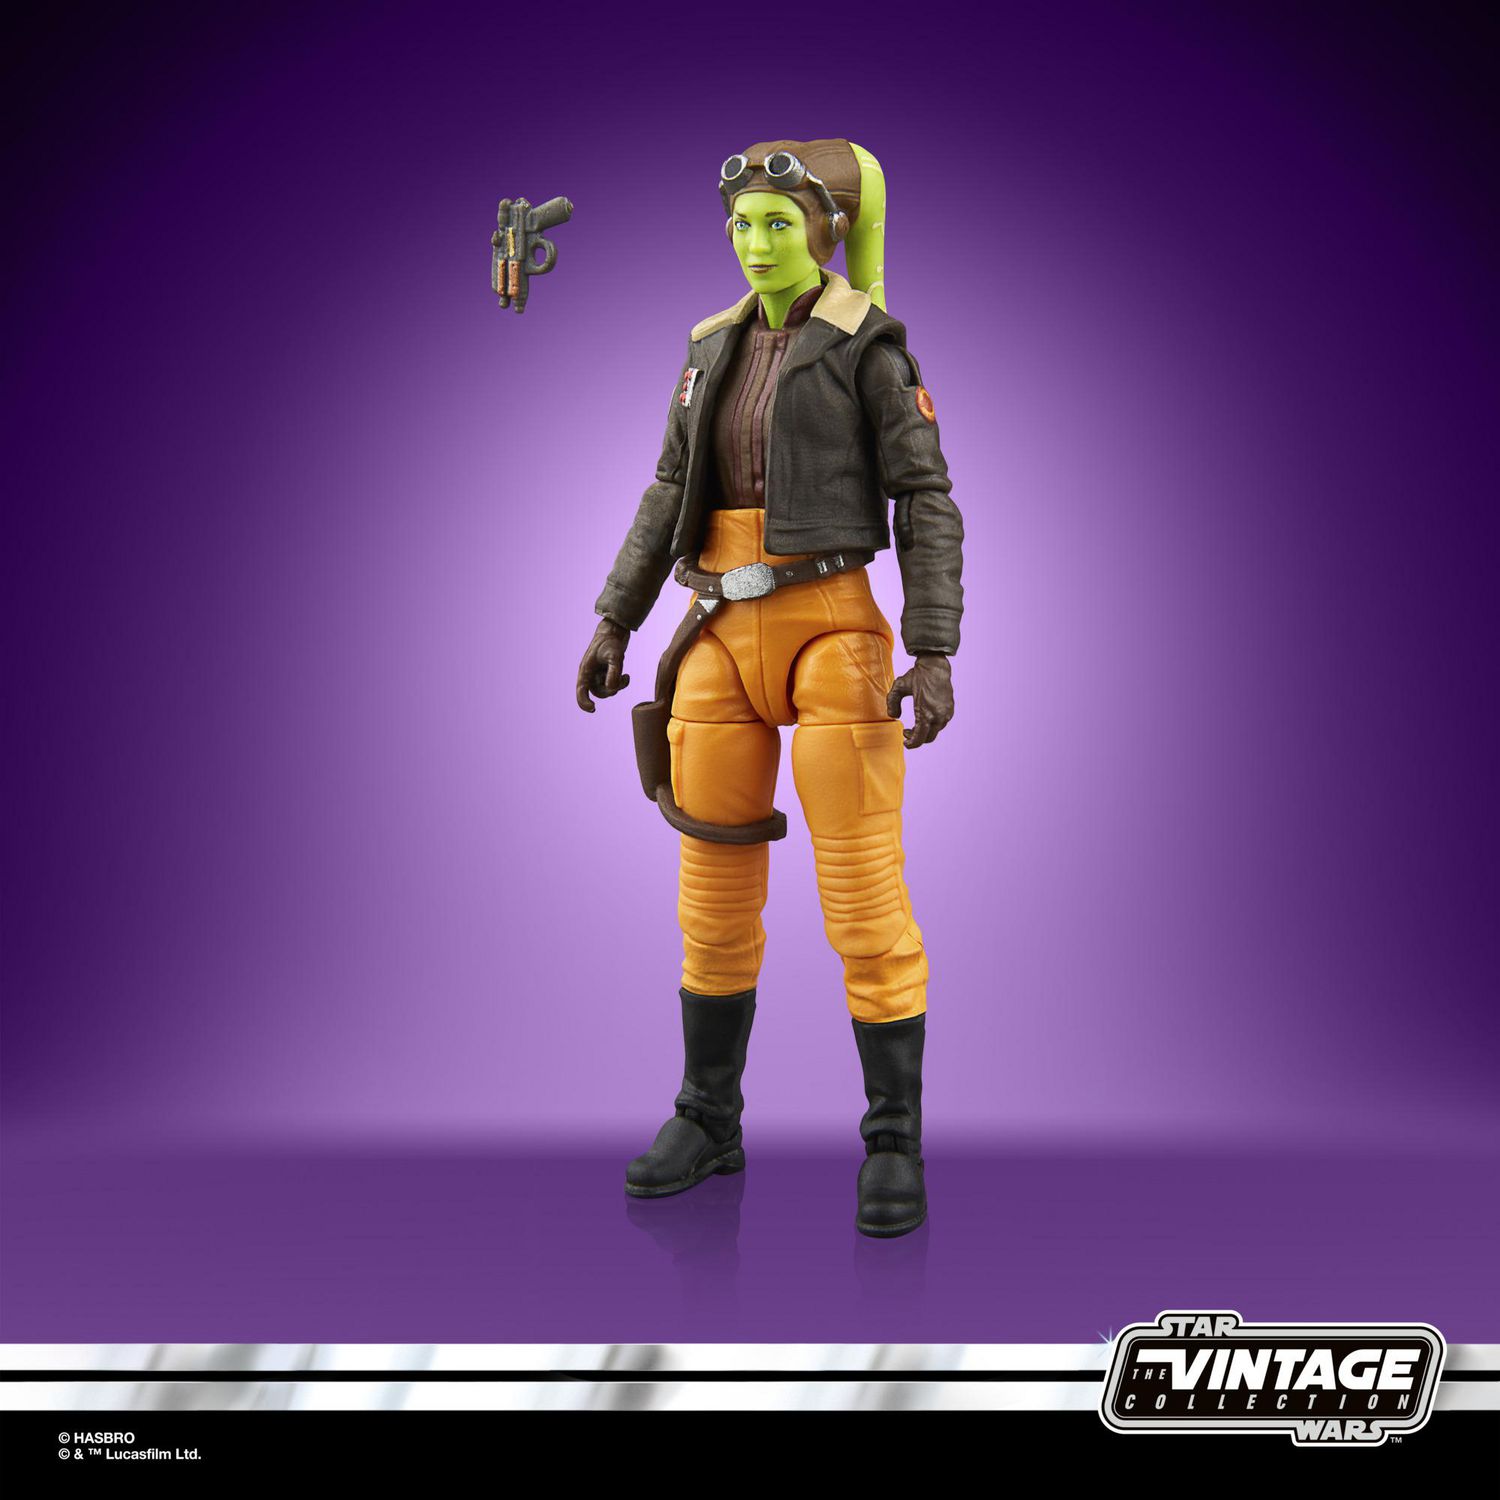 Star Wars The Vintage Collection General Hera Syndulla, Star Wars 